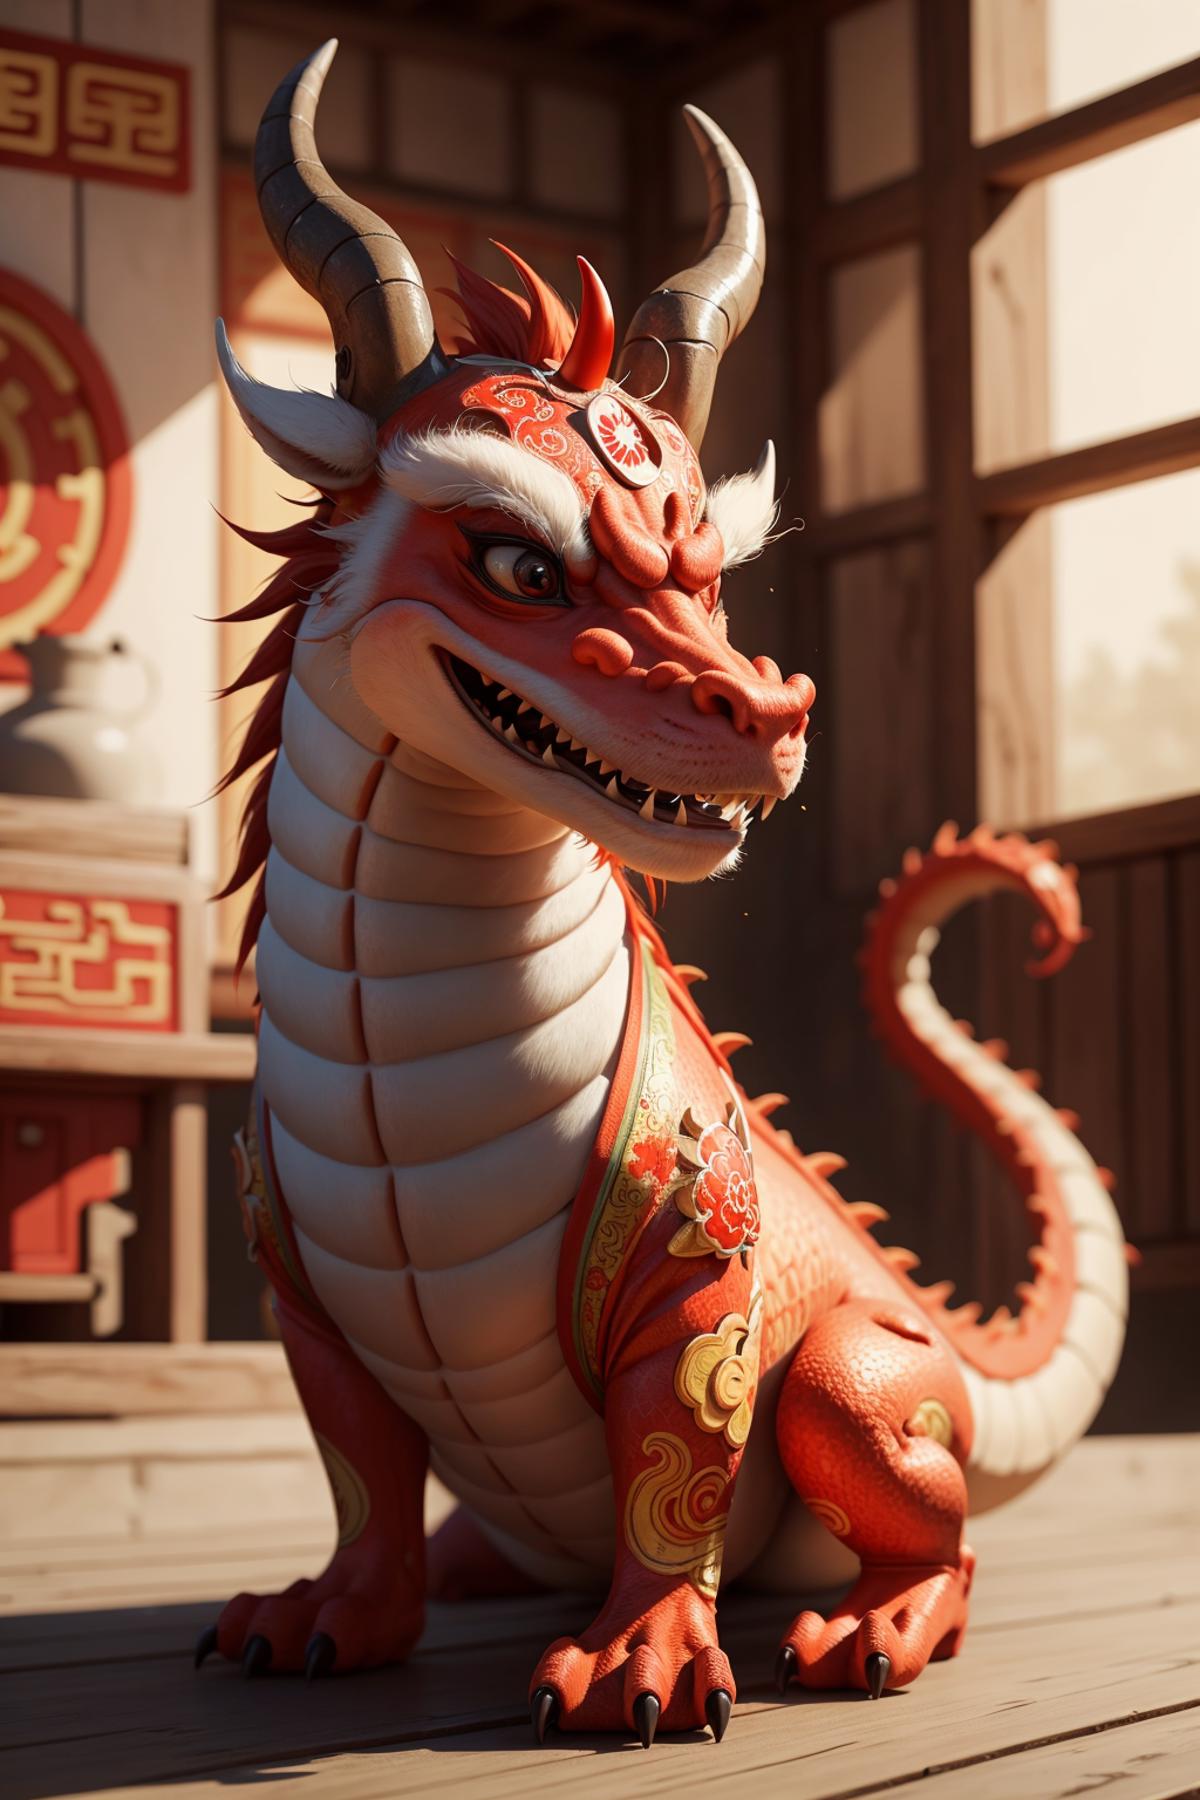 Dragon 龙年新春 image by IceVixen